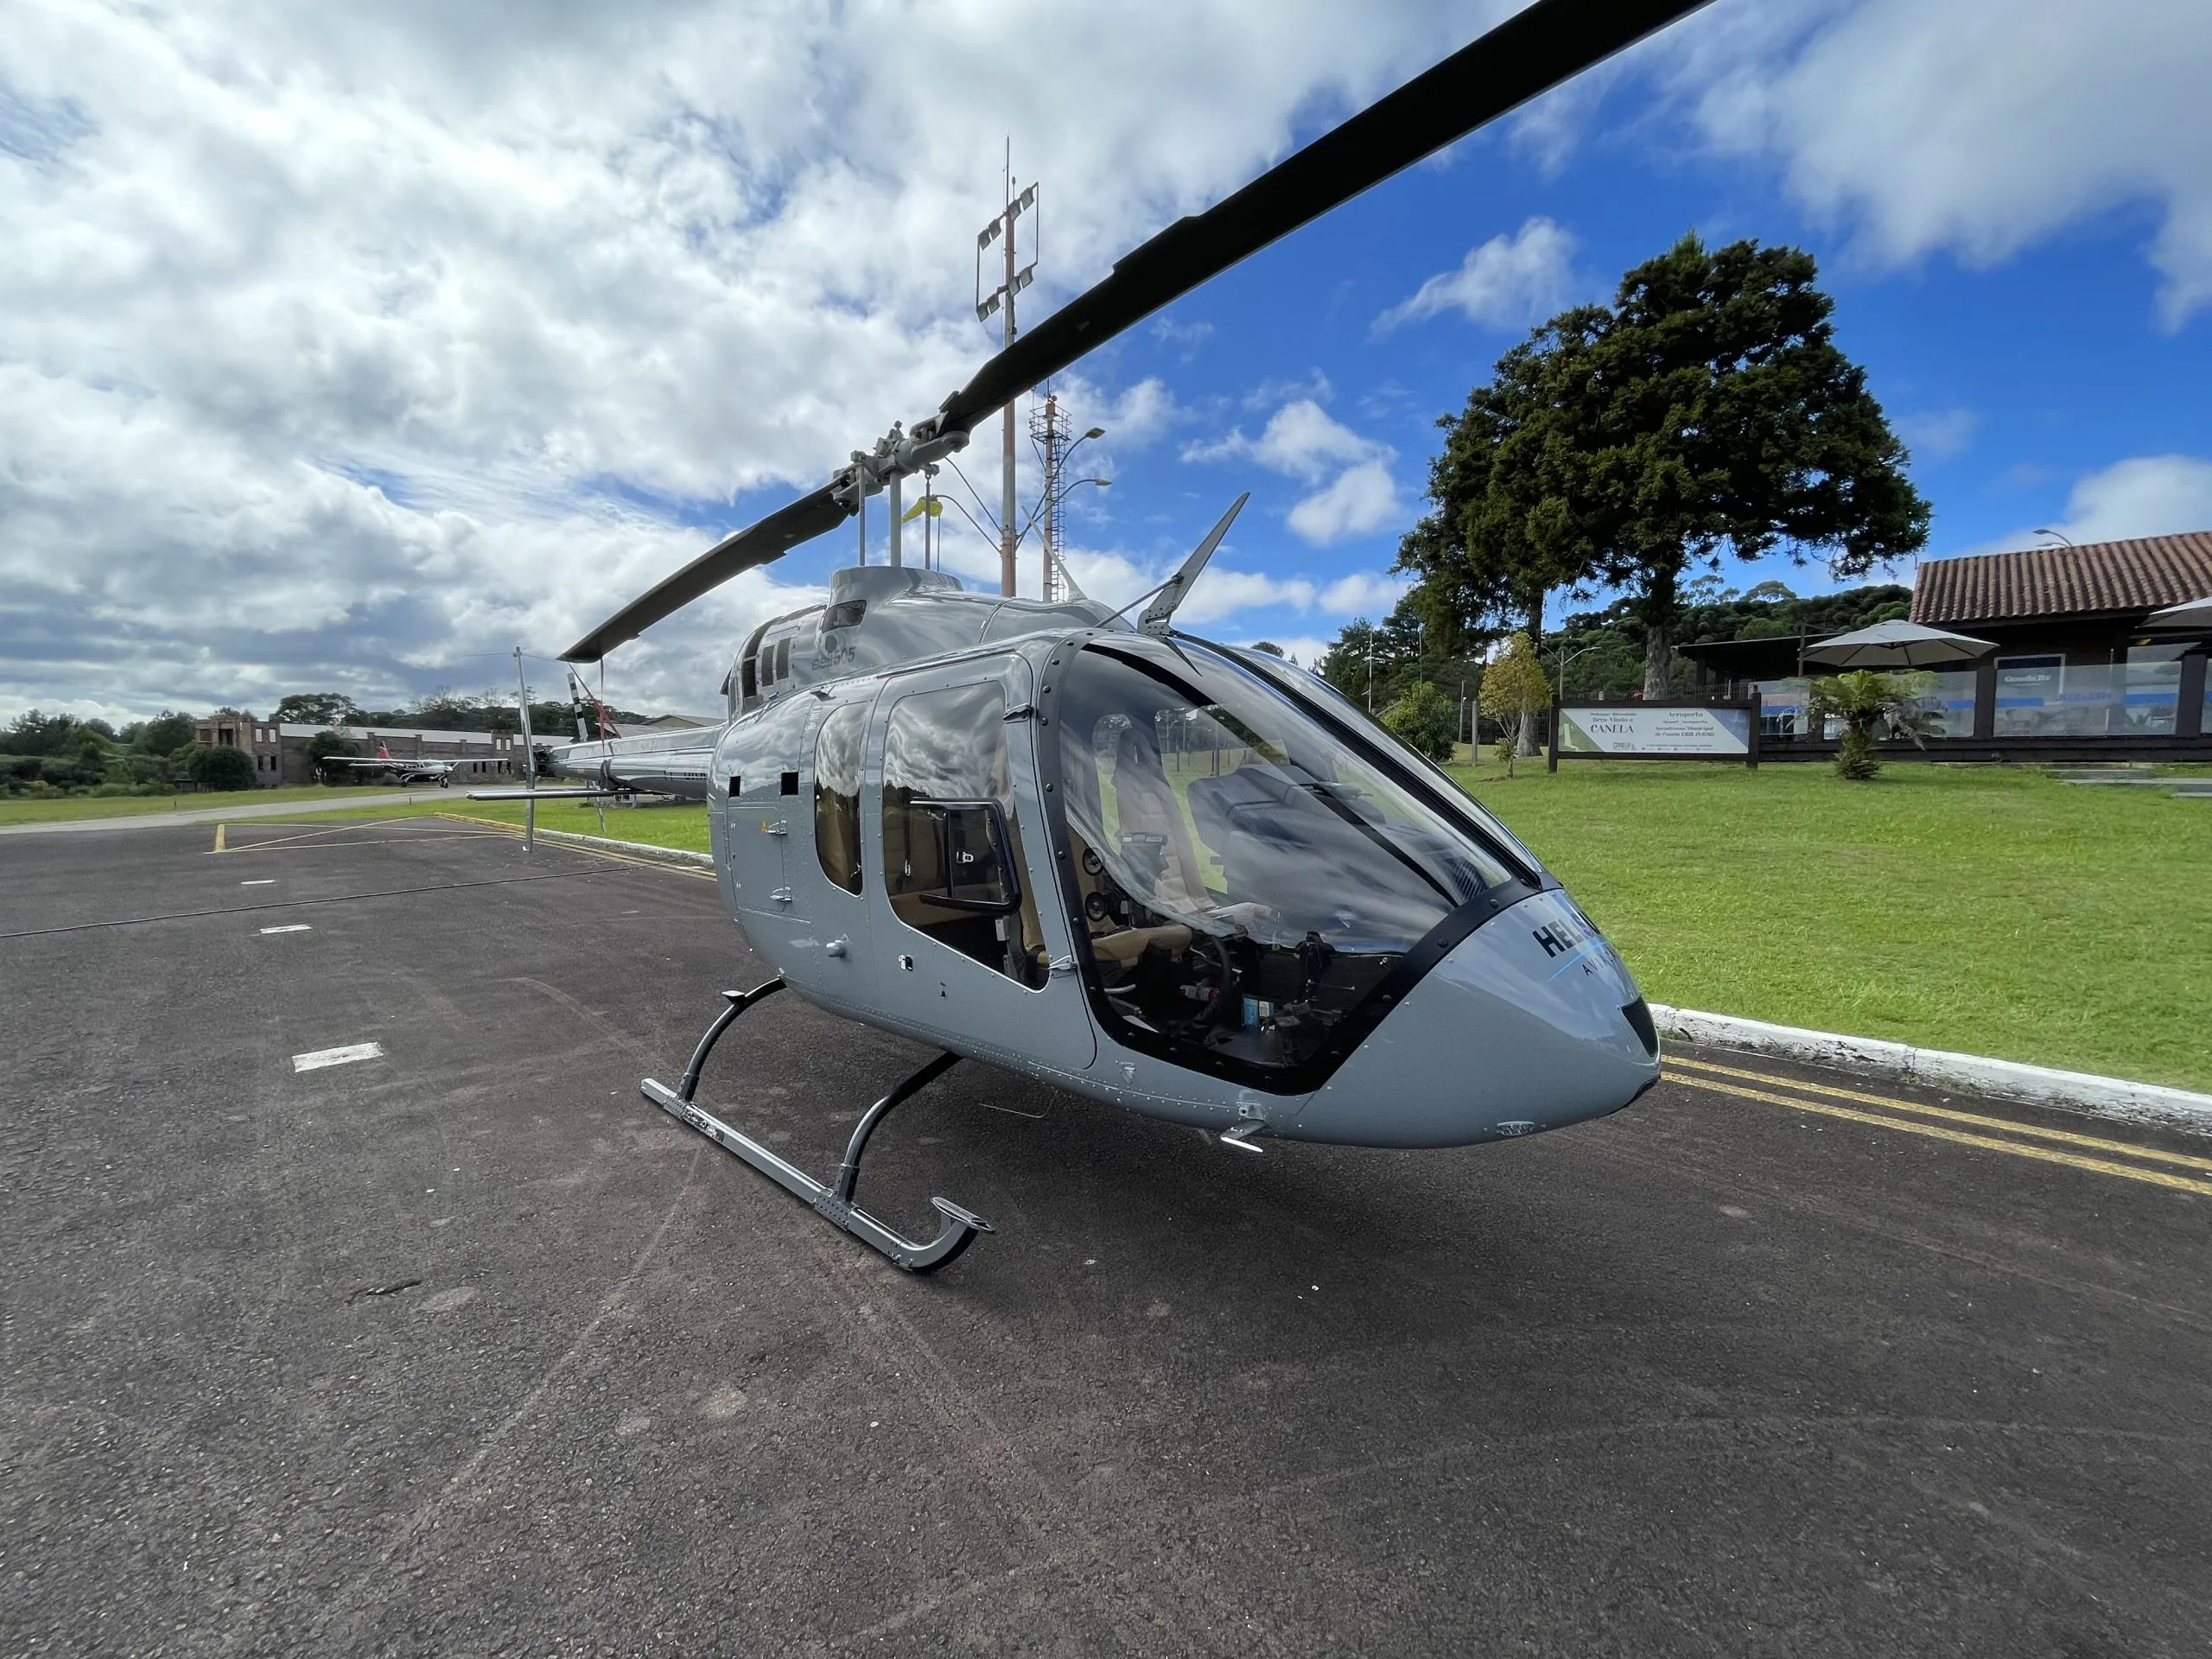 Helisul Taxi Aereo Voos Panoramicos in Brazil, South America | Helicopter Sport - Rated 6.2